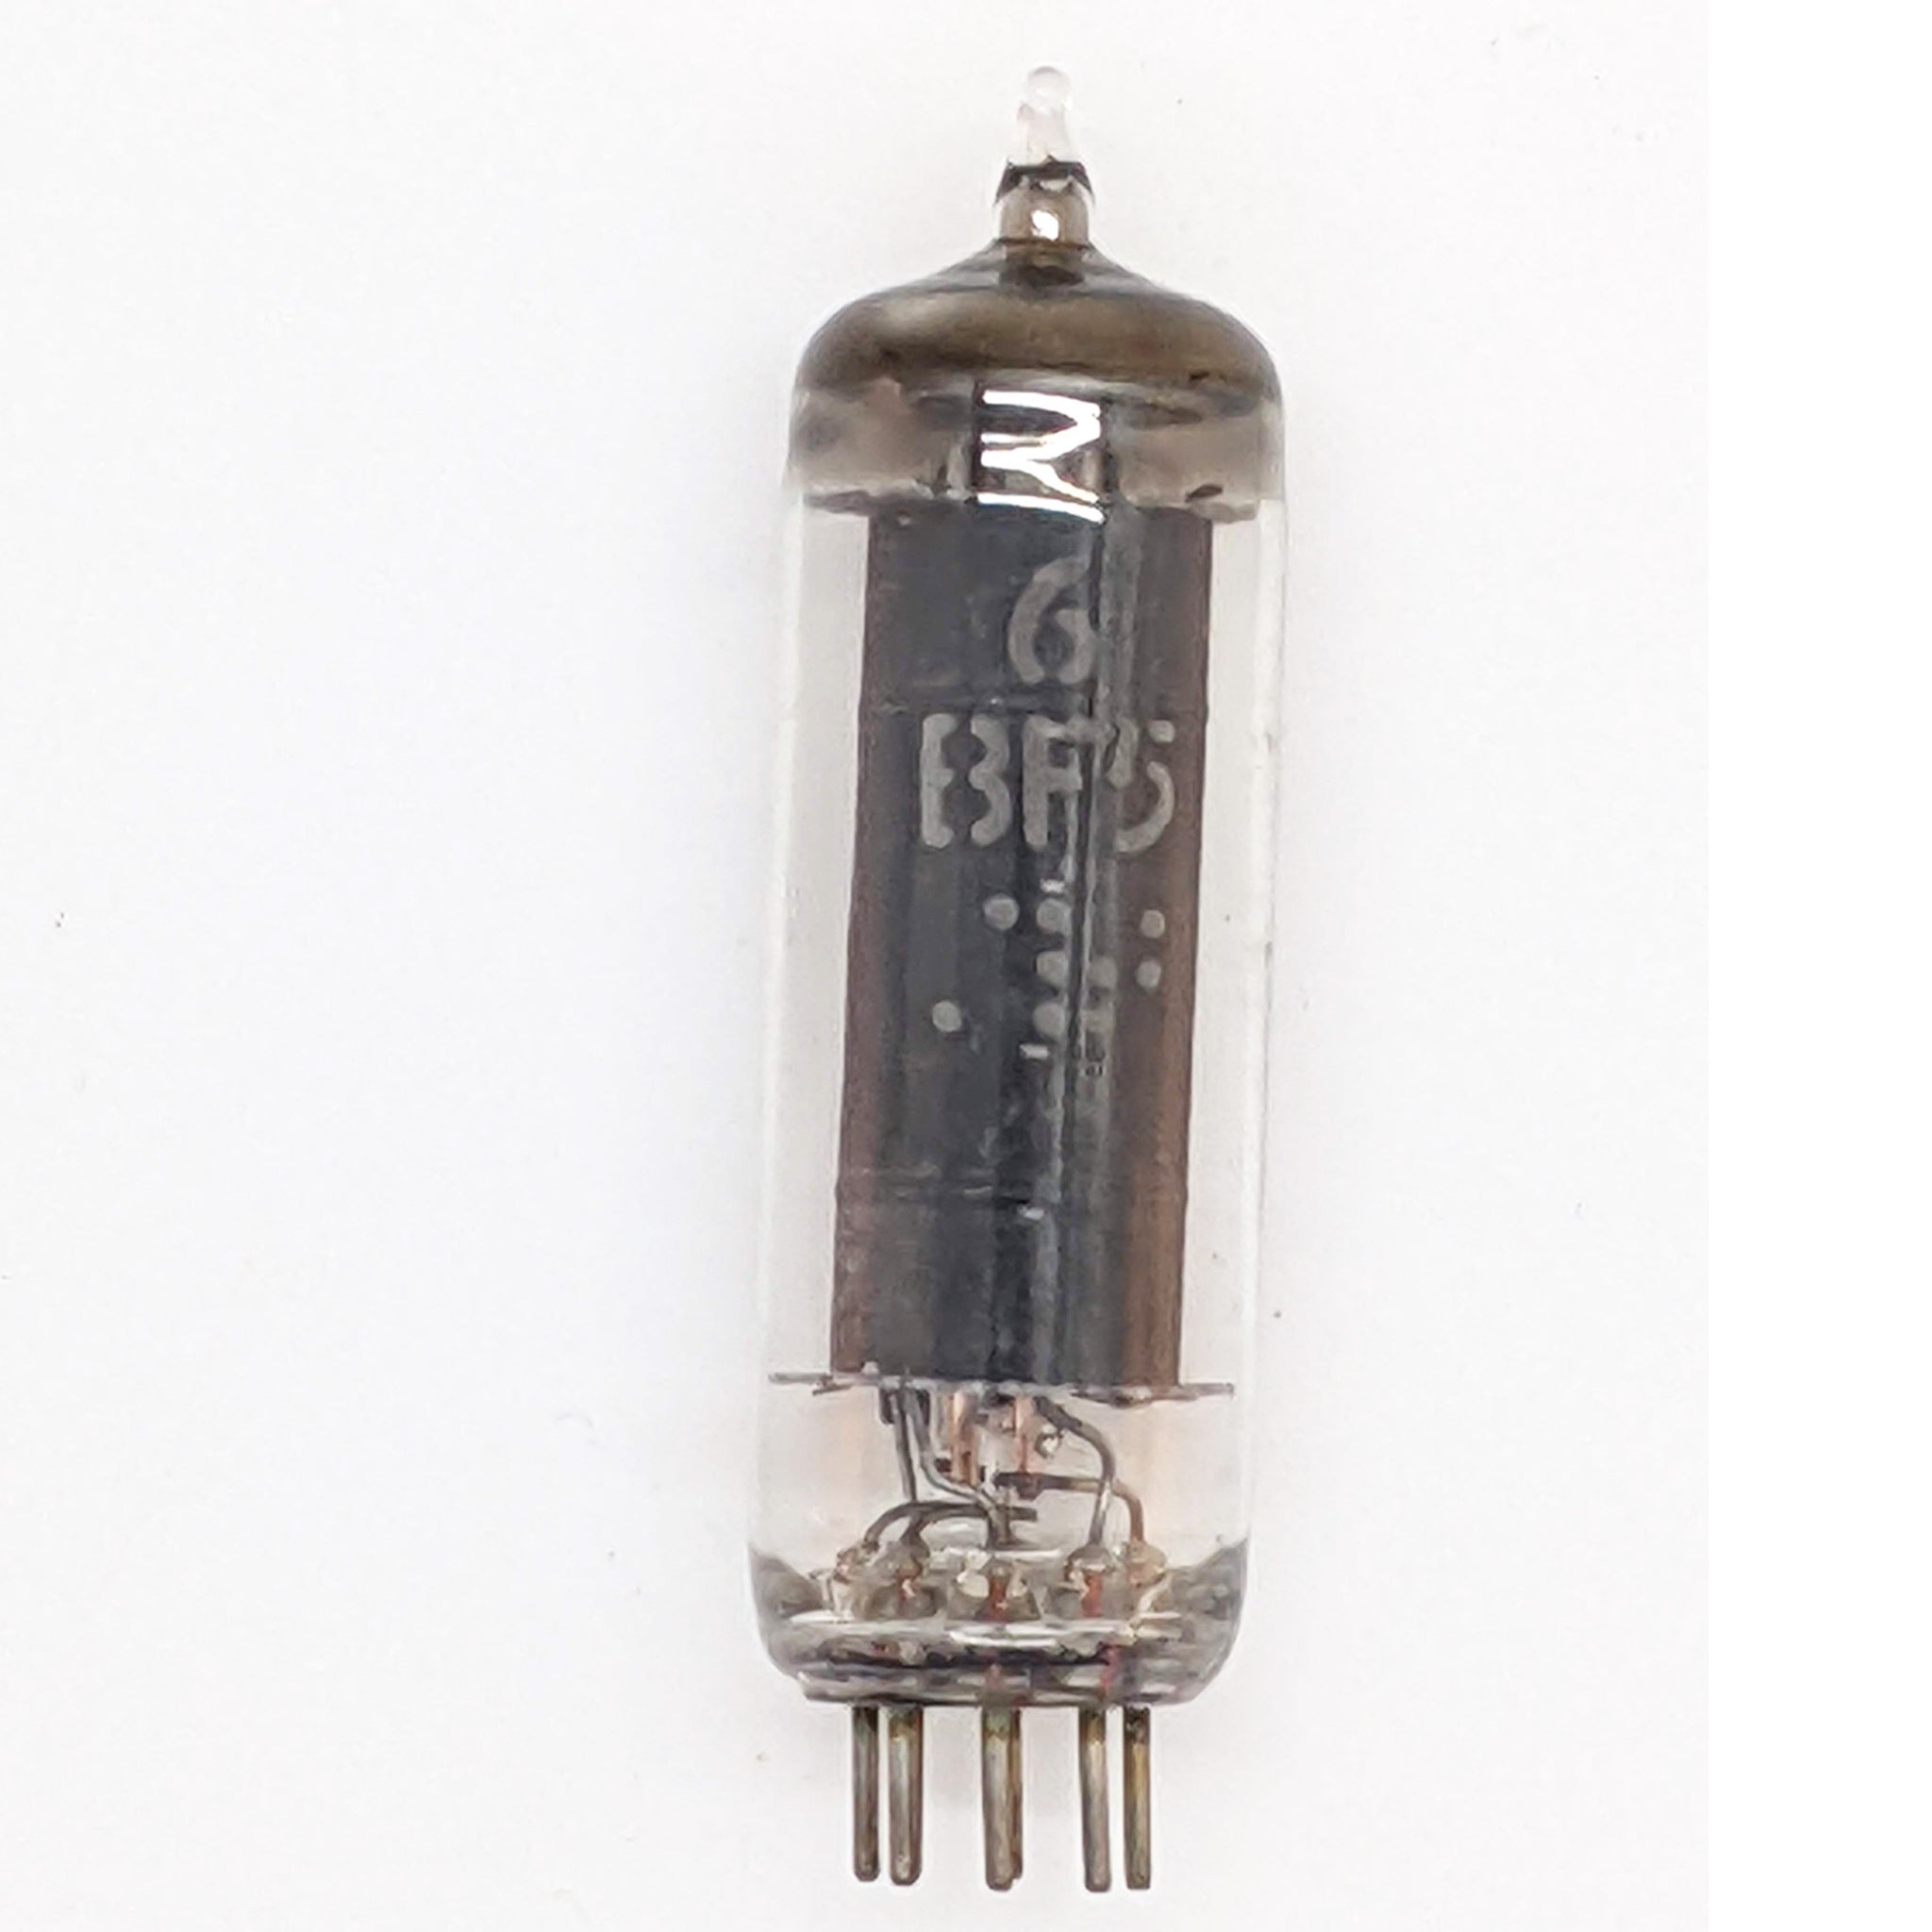 6BF5 Vacuum Tube, Tested Good, Ships Quick From Mississippi